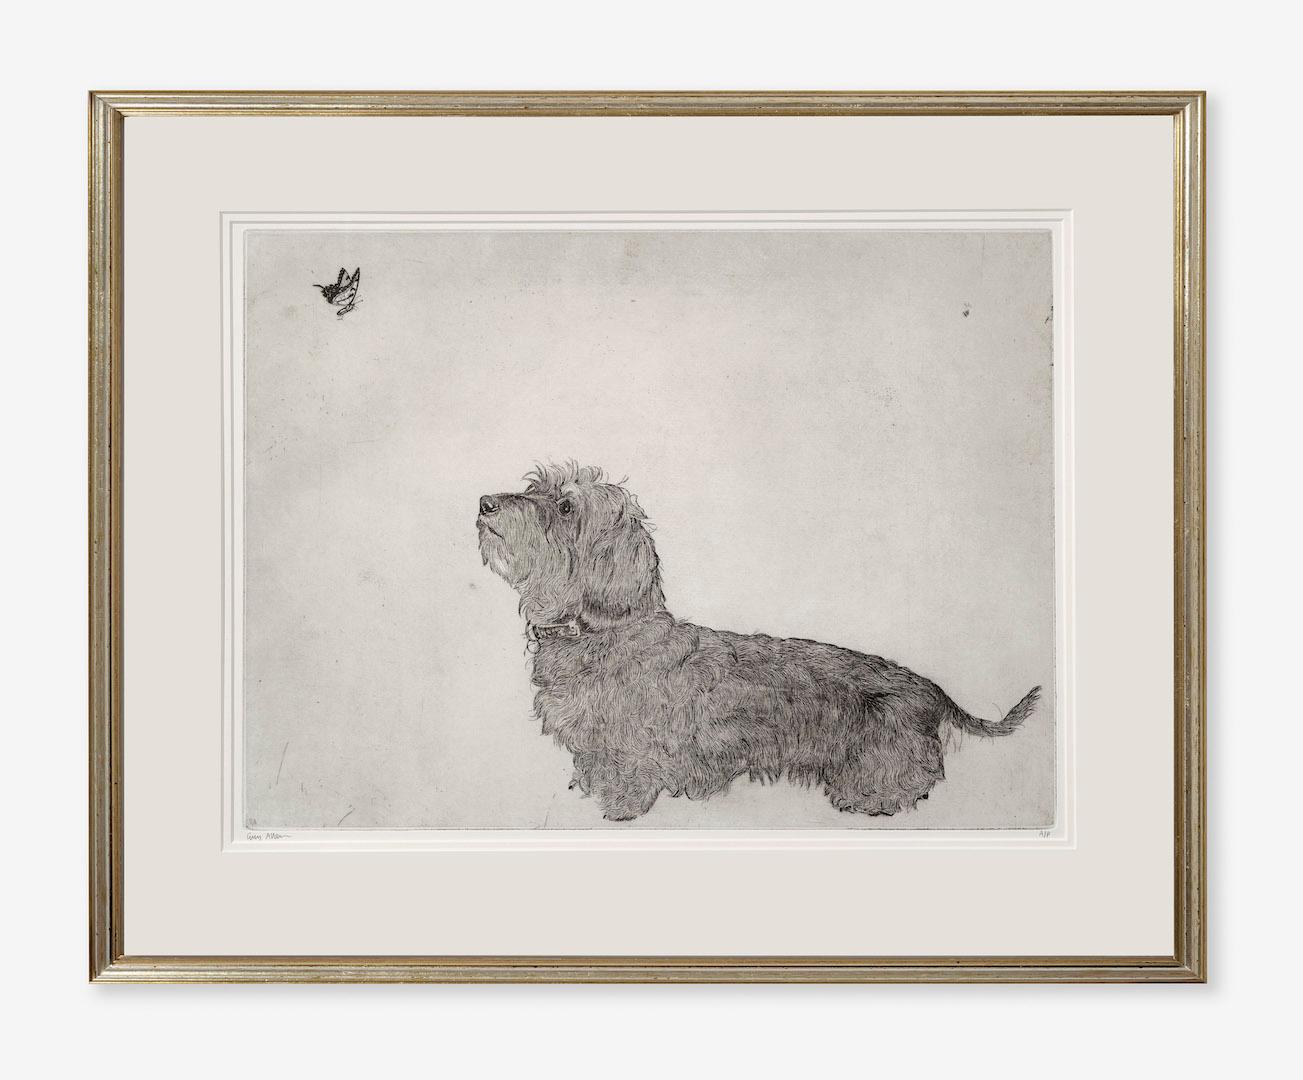 Guy Allen
Dachshund and Butterfly
Etching
Edition Size: 75
Year Completed: 2015
Image Size: H 40m x W 54 cm
Approximate Size When Framed: H 69cm x W 87cm
Sold Unframed
(Please note that in situ images are purely an indication of how a piece may